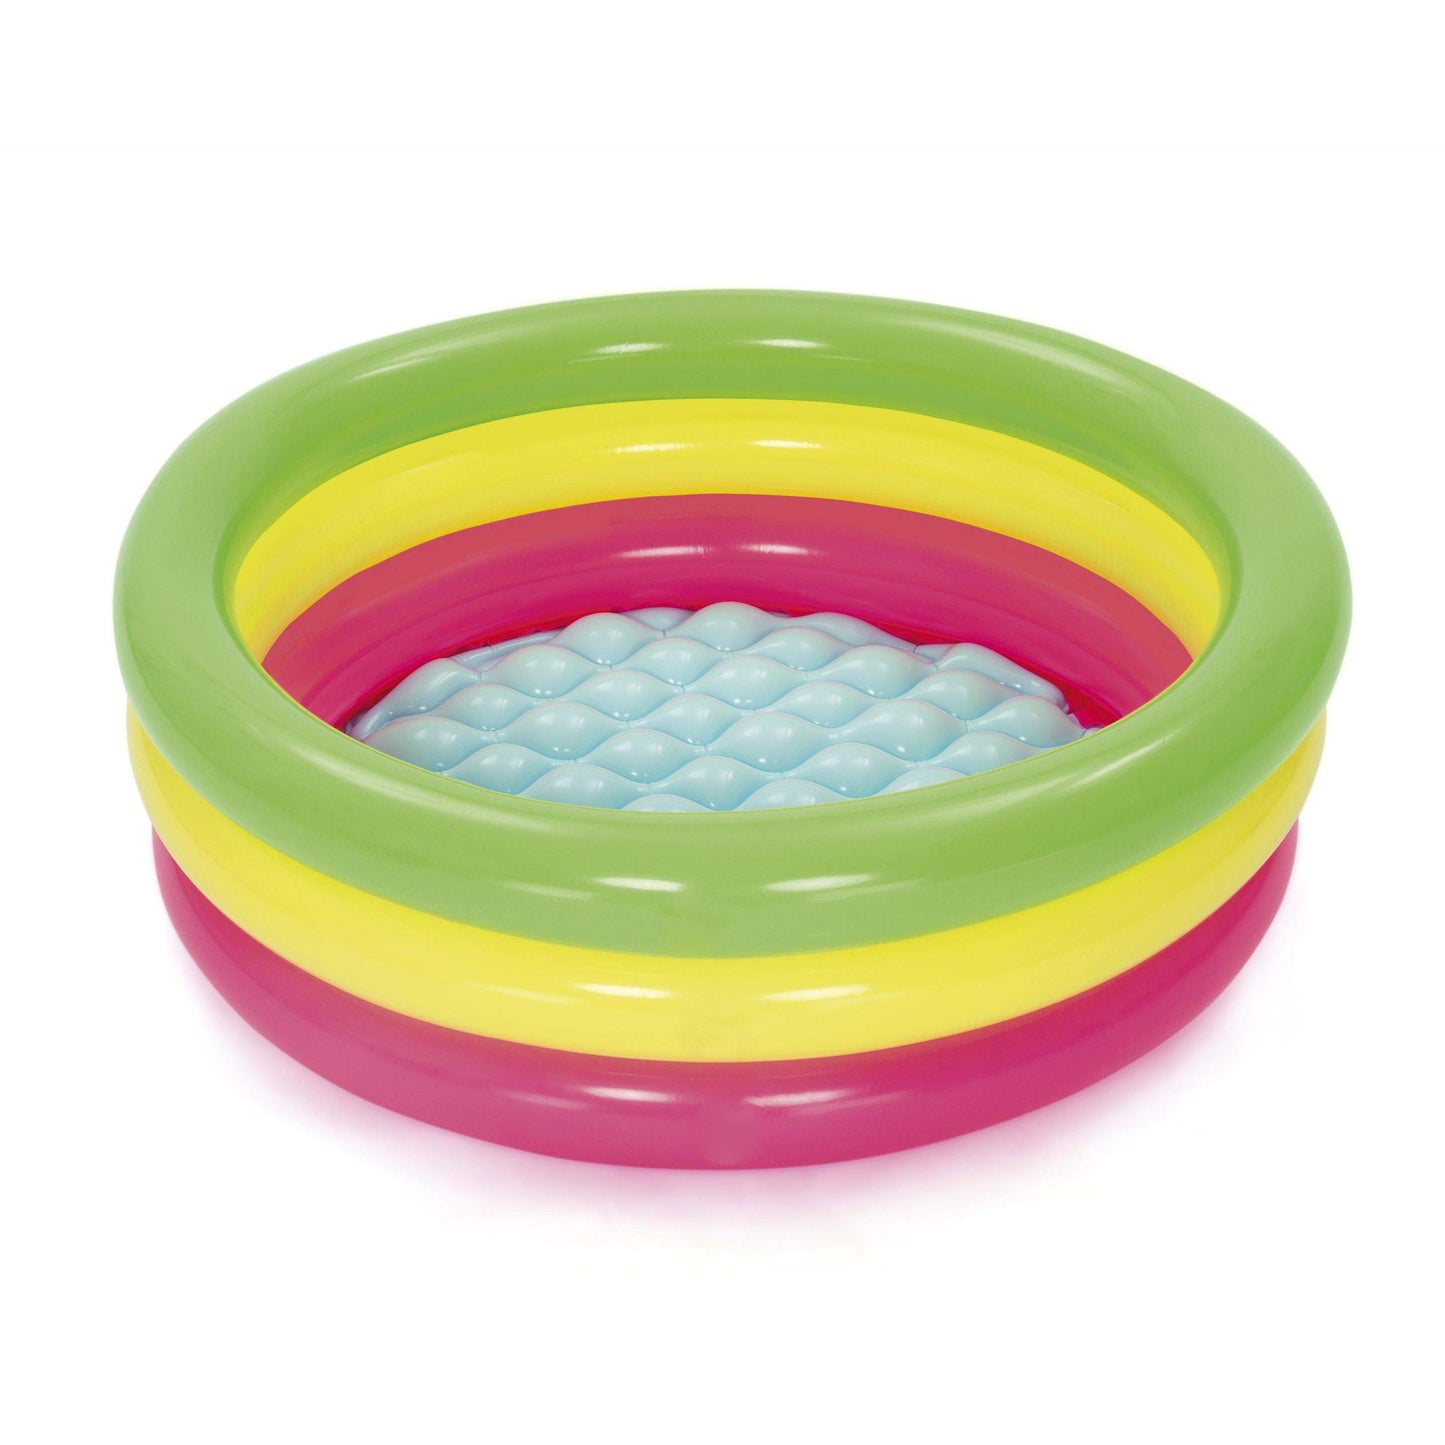 BESTWAY Ground Swimming Pool Set for Kids 2ft 3.5in x 9.5in